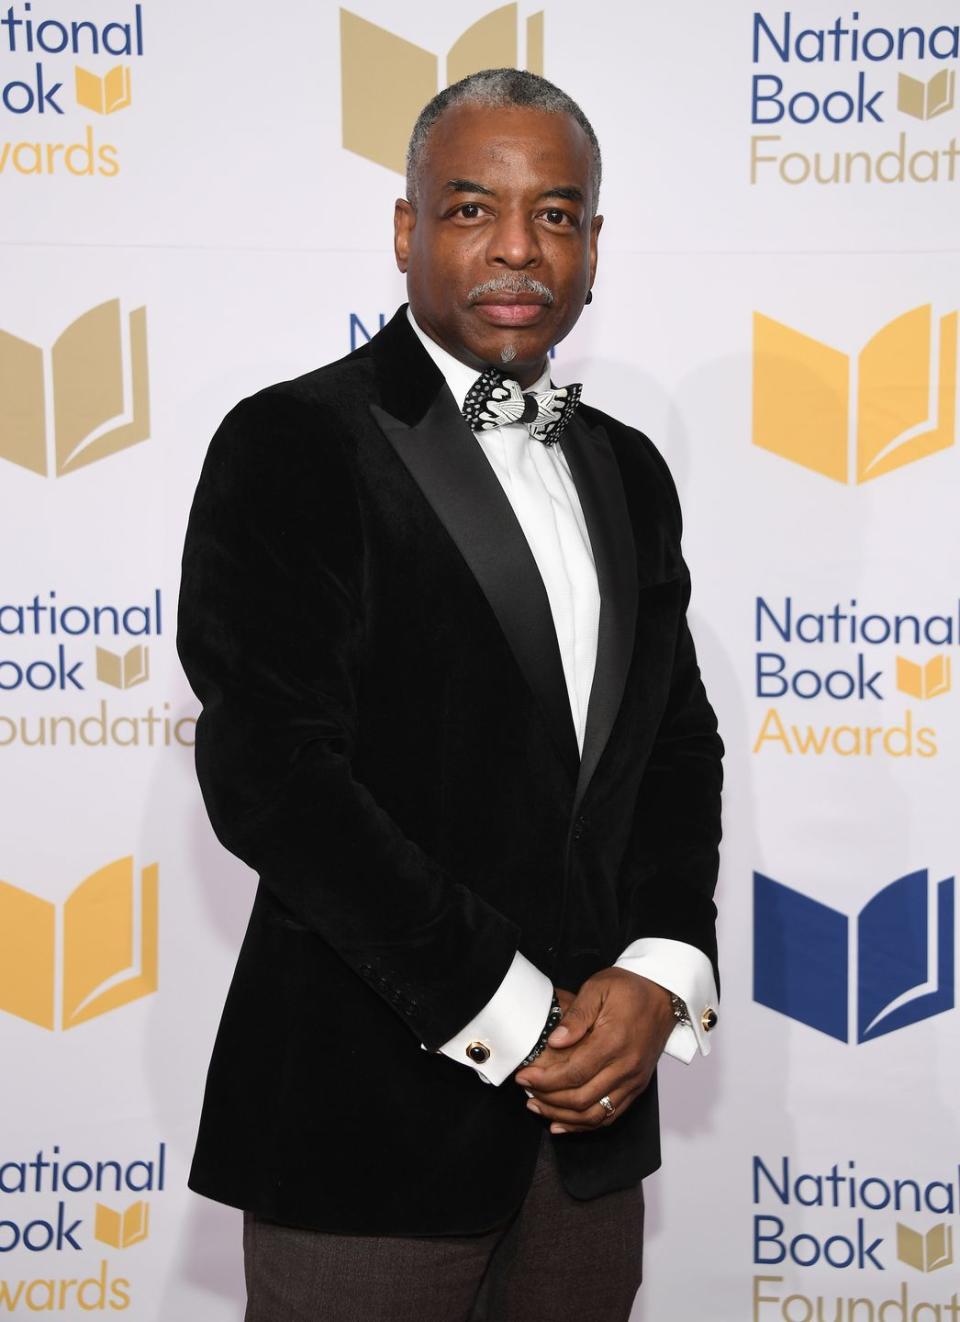 <p><strong>Schedule:</strong> July 26 - July 30</p><p>The former host of <em>Reading Rainbow </em>and host of his own podcast <em>LeVar Burton Reads</em> is joining the <em>Jeopardy!</em> team this summer to temporarily lead the show.</p>